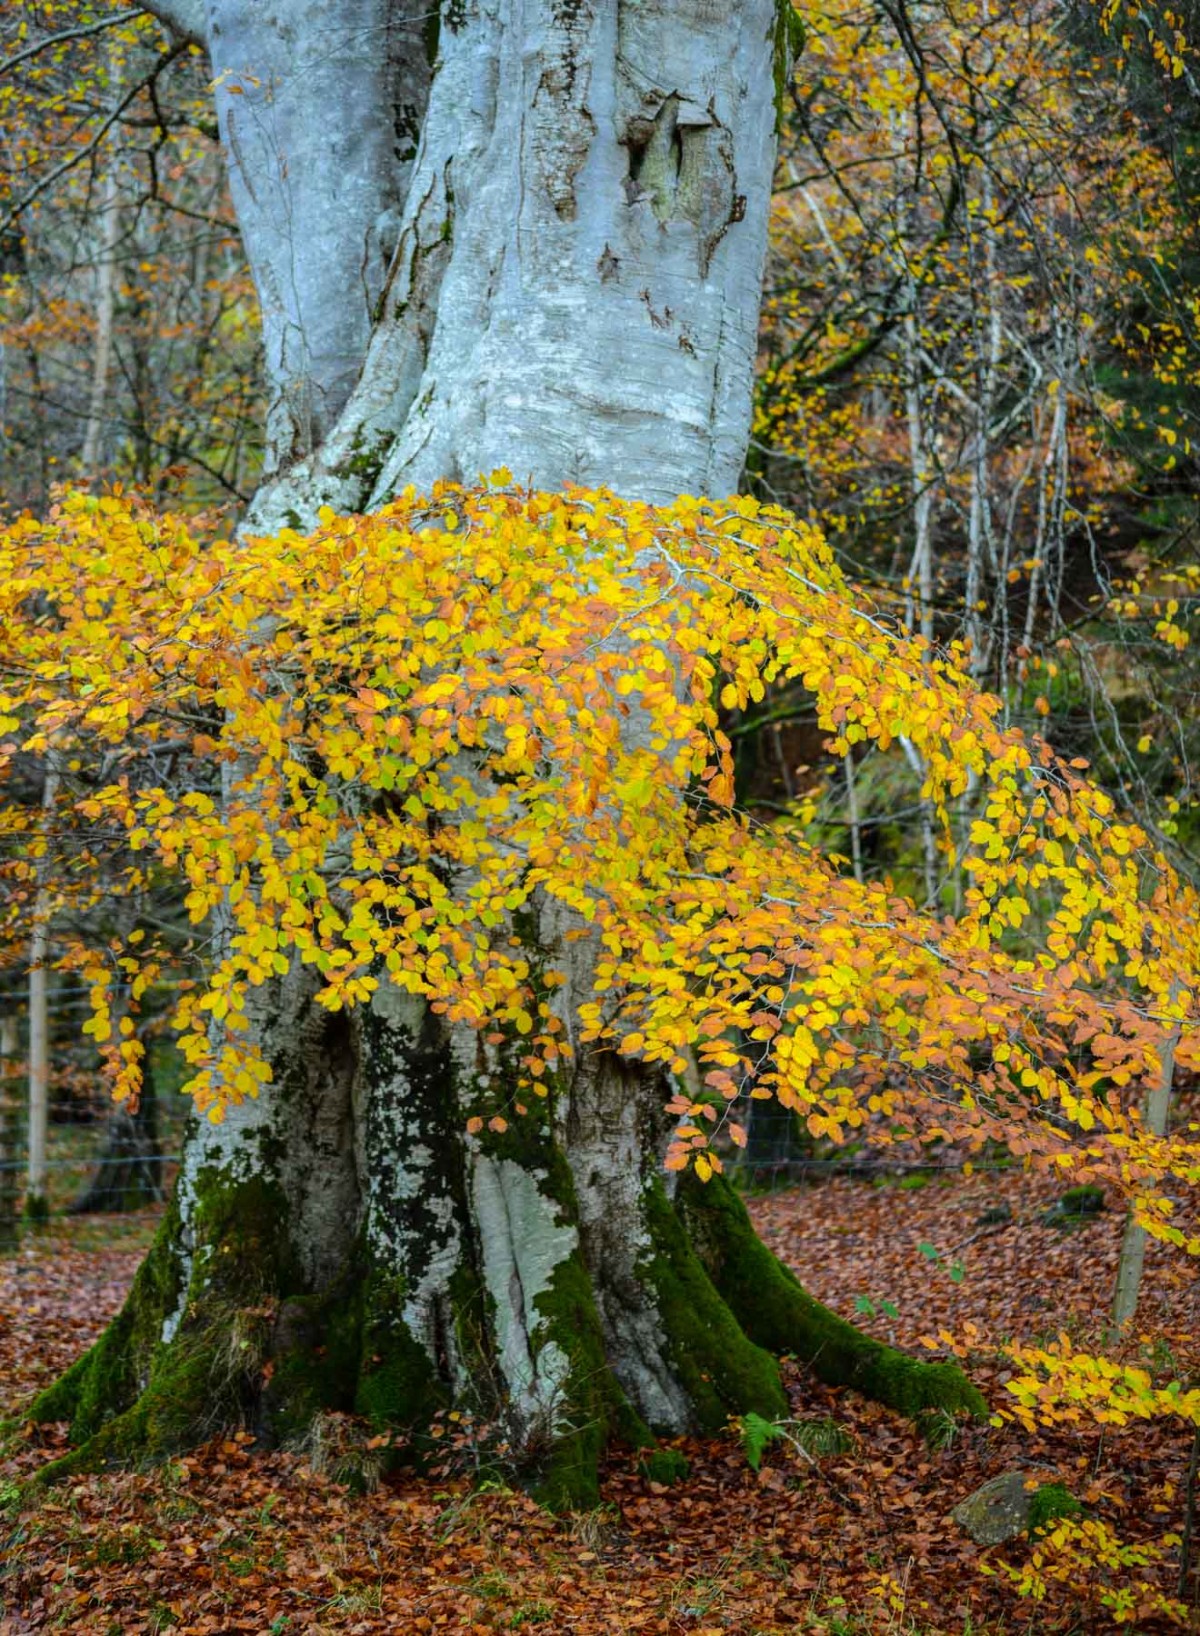 A delicate yellow tree which can be found in Glen Lyon, Perthshire. Perthshire is regarded as 'big tree country' and a wide range tree species and varieties can be found there easily.